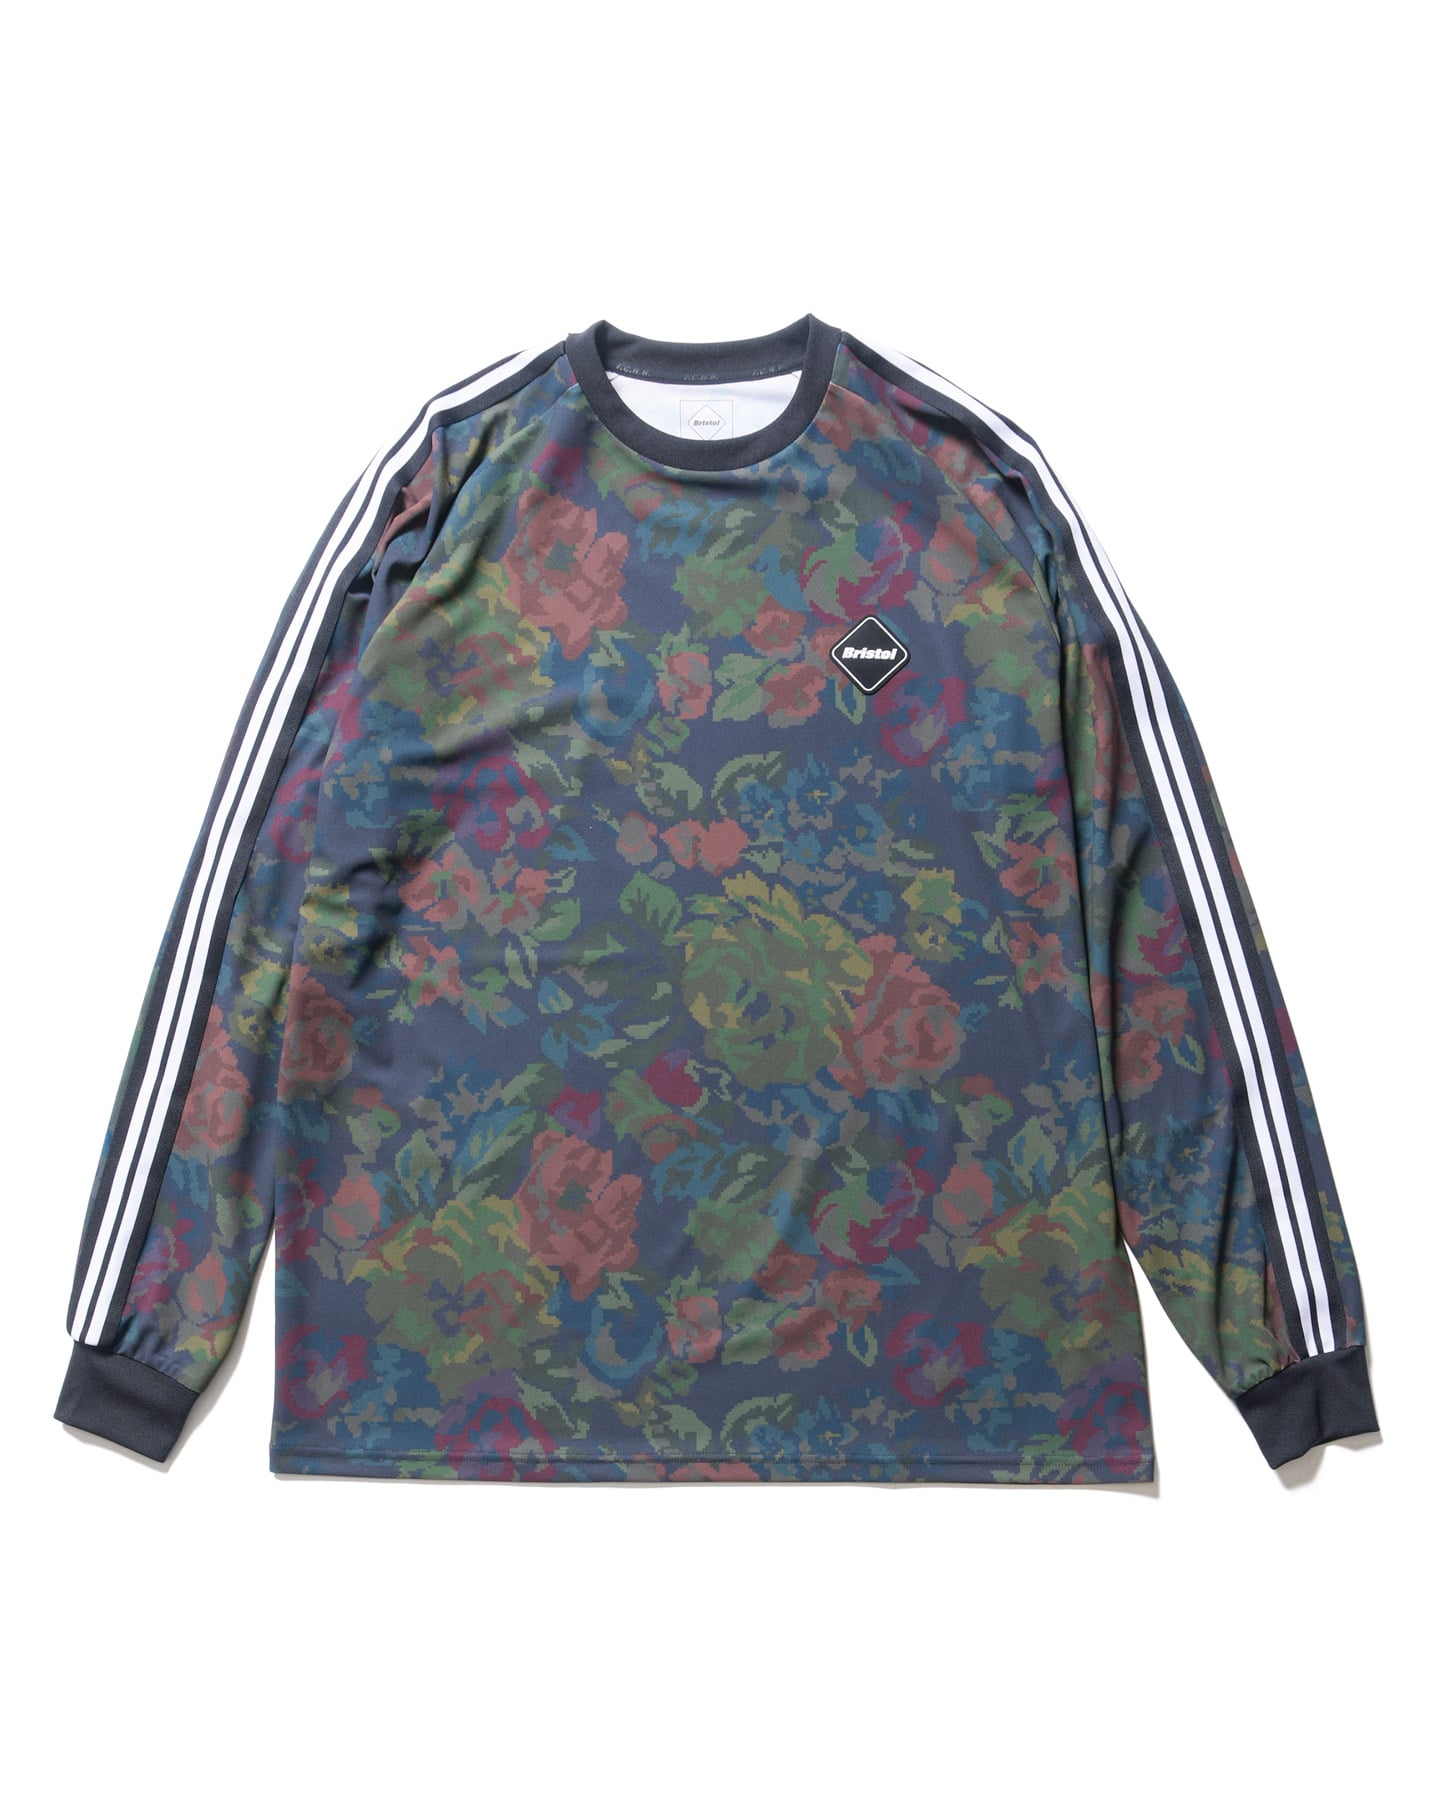 FCRB 24SS L/S TRAINING TOP NAVY FLOWER納品書等の同封もできかねます